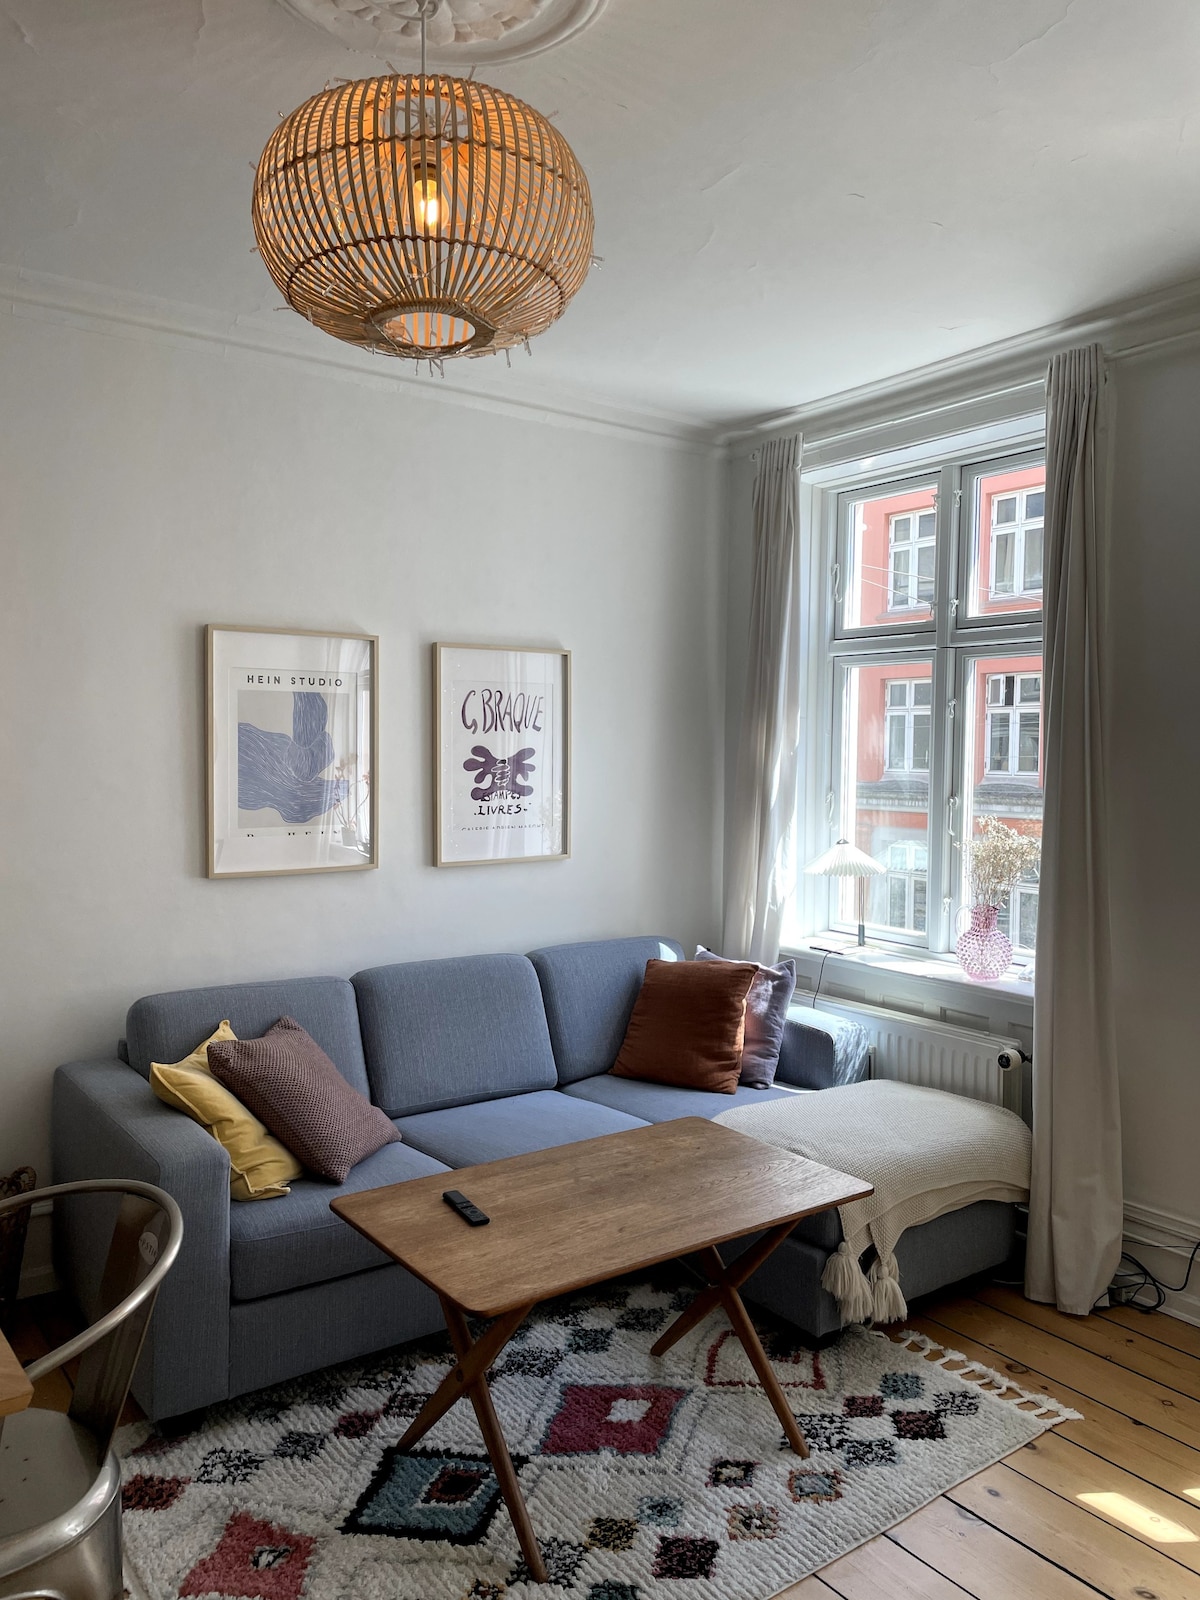 Spacious 2-bedroom apartment situated in Nørrebro